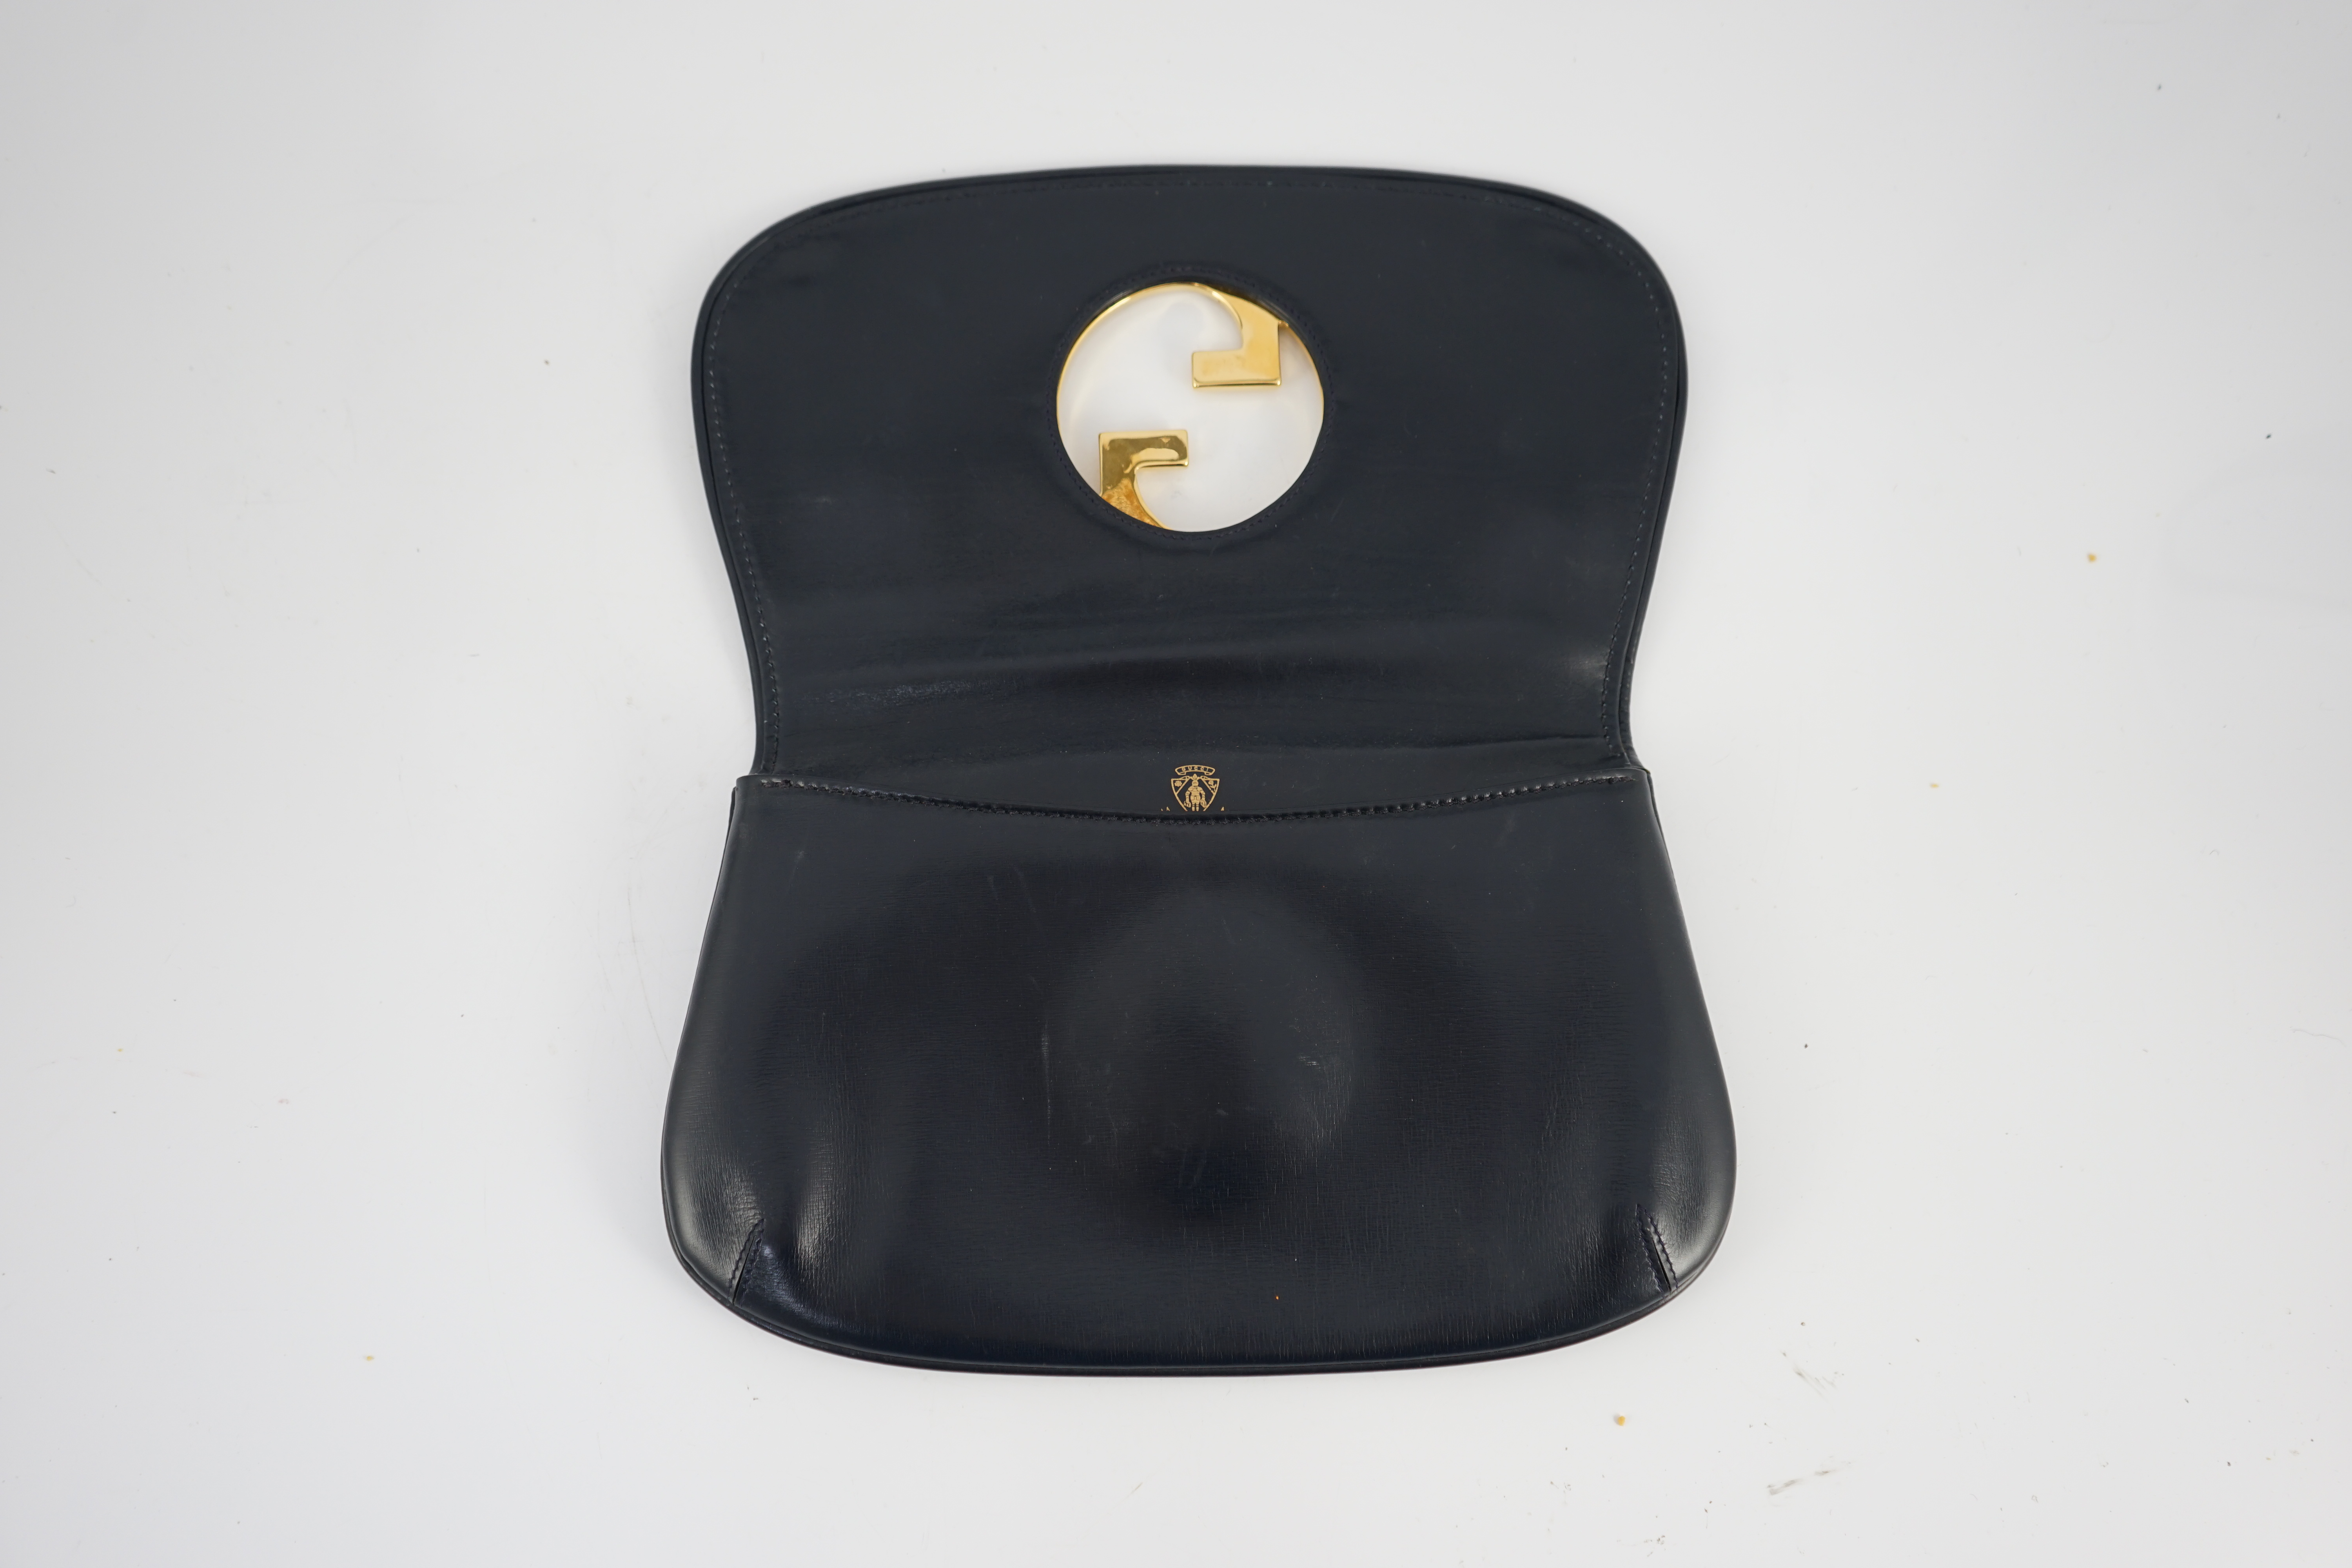 A vintage Gucci Blondie Unicorn navy leather clutch bag, Gold Gucci front logo, weighted closure, - Image 3 of 4